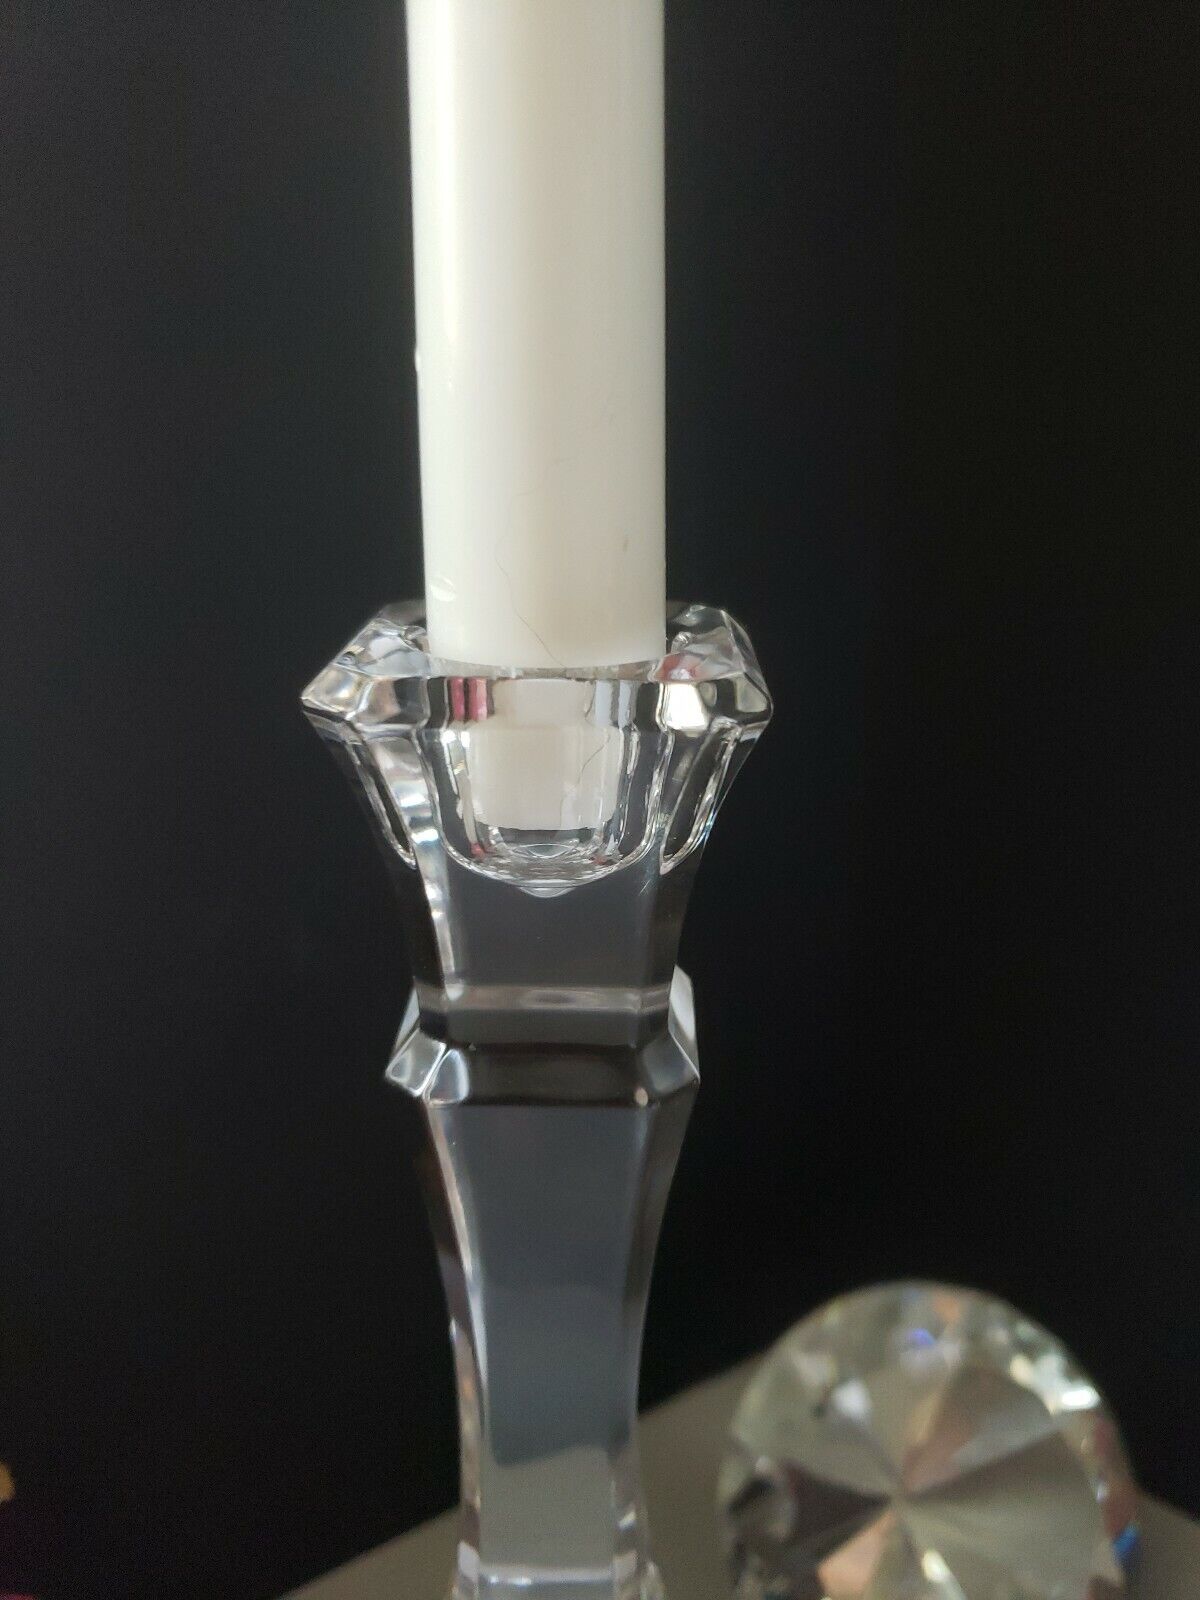 Mikasa - Pair of Lead Crystal Candle Holders  Made in Austria - NEW/DISPLAY ITEM Mikasa - фотография #6